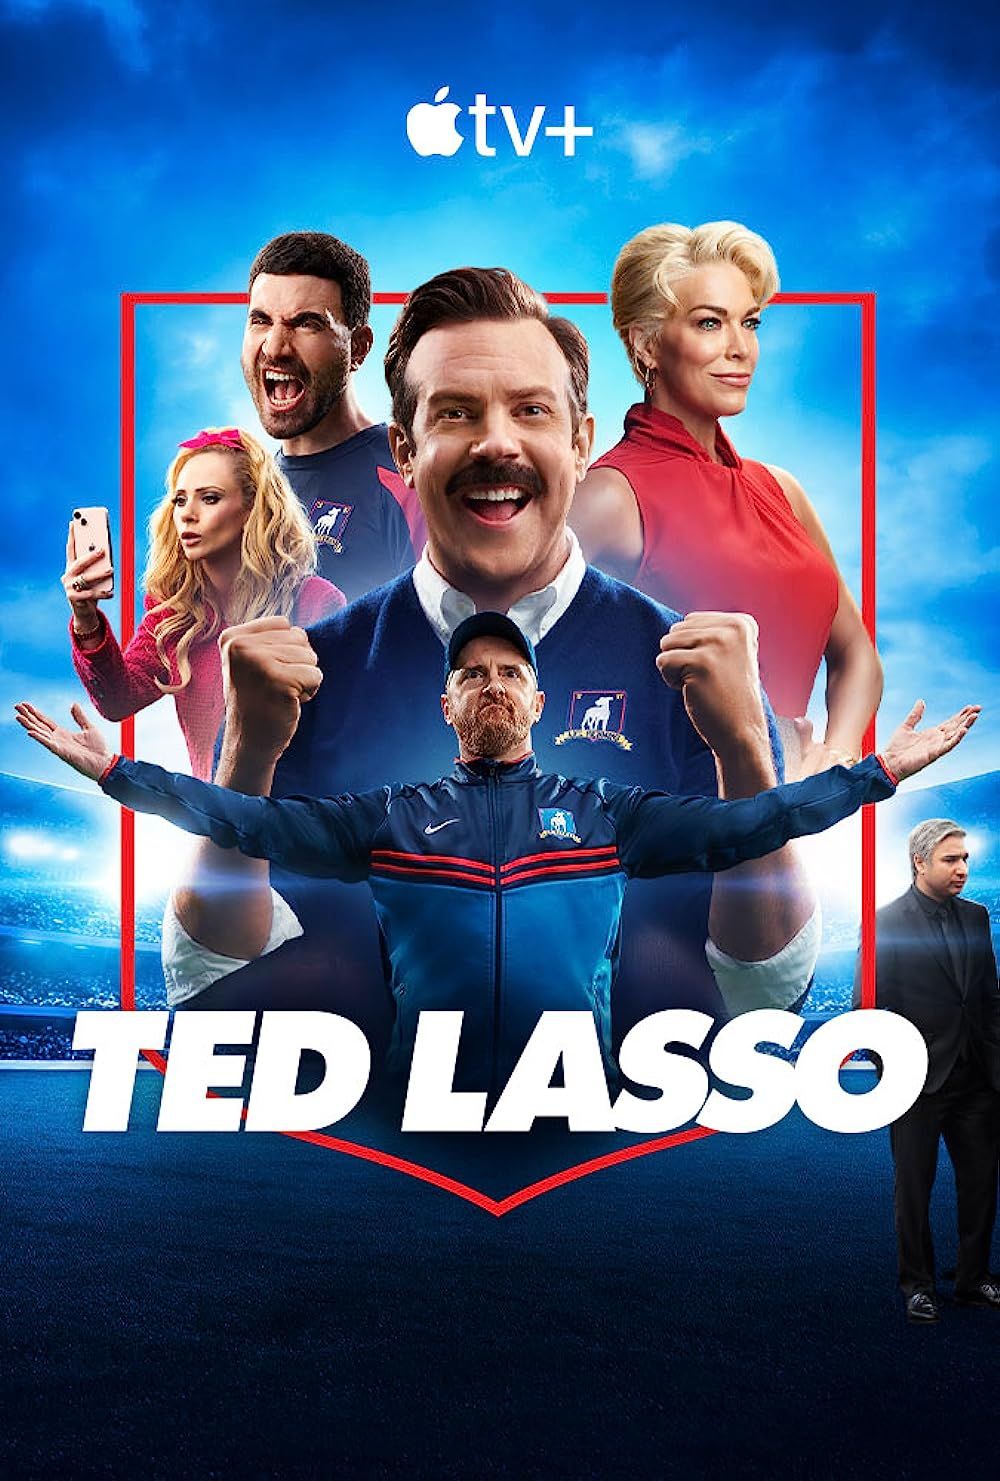 Promotional image for TED LASSO